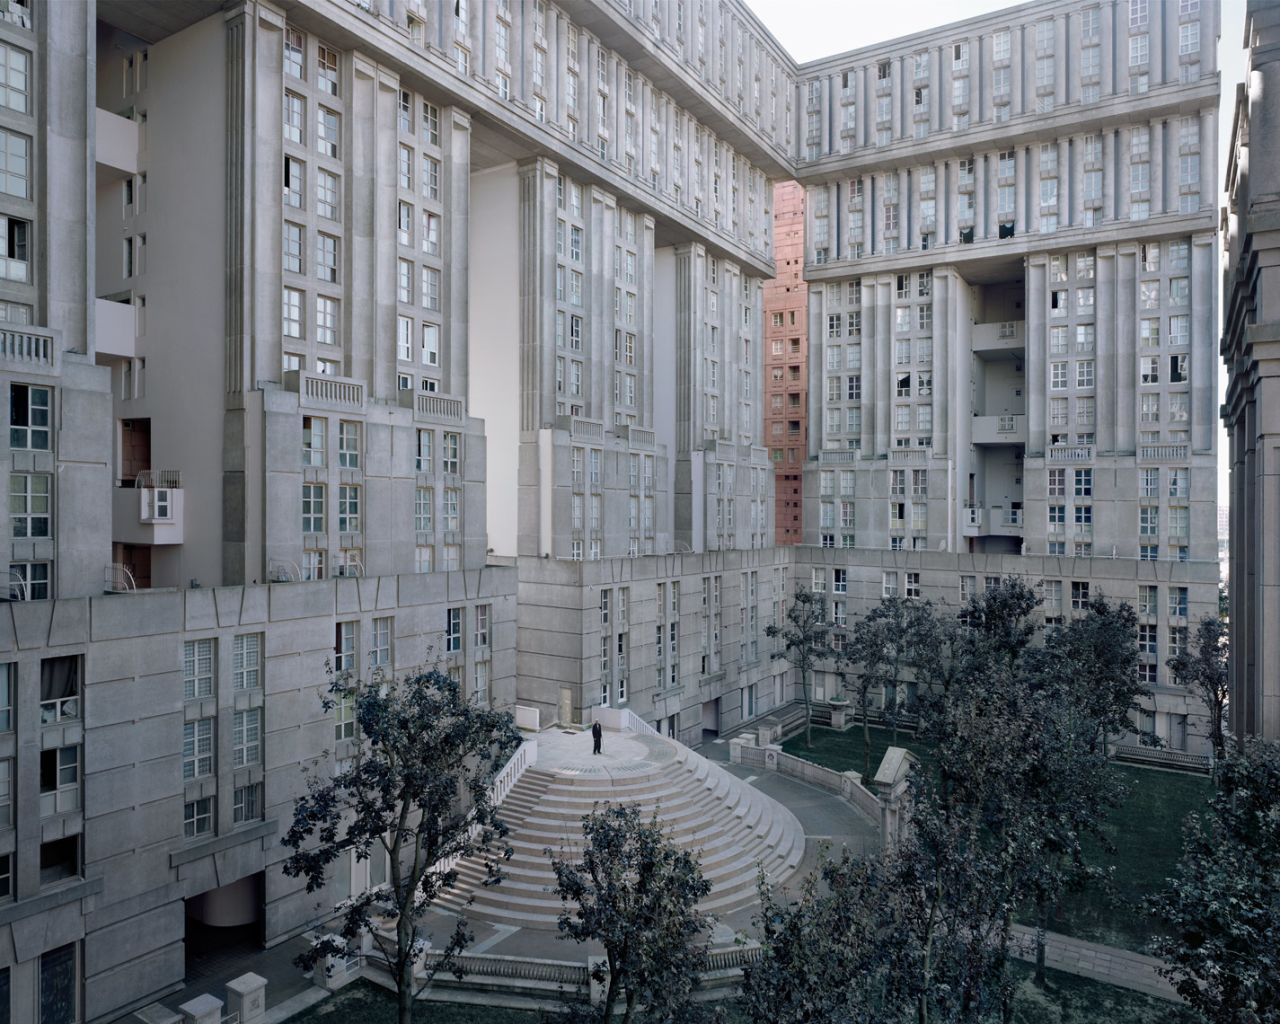 Joseph, 88, Les Espaces d'Abraxas, Noisy-le-Grand, 2014<br /><br />Laurent Kronental's breathtaking photographs unite the colossal, futuristic buildings of Paris housing estates and the senior citizens who live among them. The buildings have been used as backdrop in several Hollywood films, including the most recent <em>Hunger</em><em> Games </em>installment. Scroll through the gallery to see his incredible images.